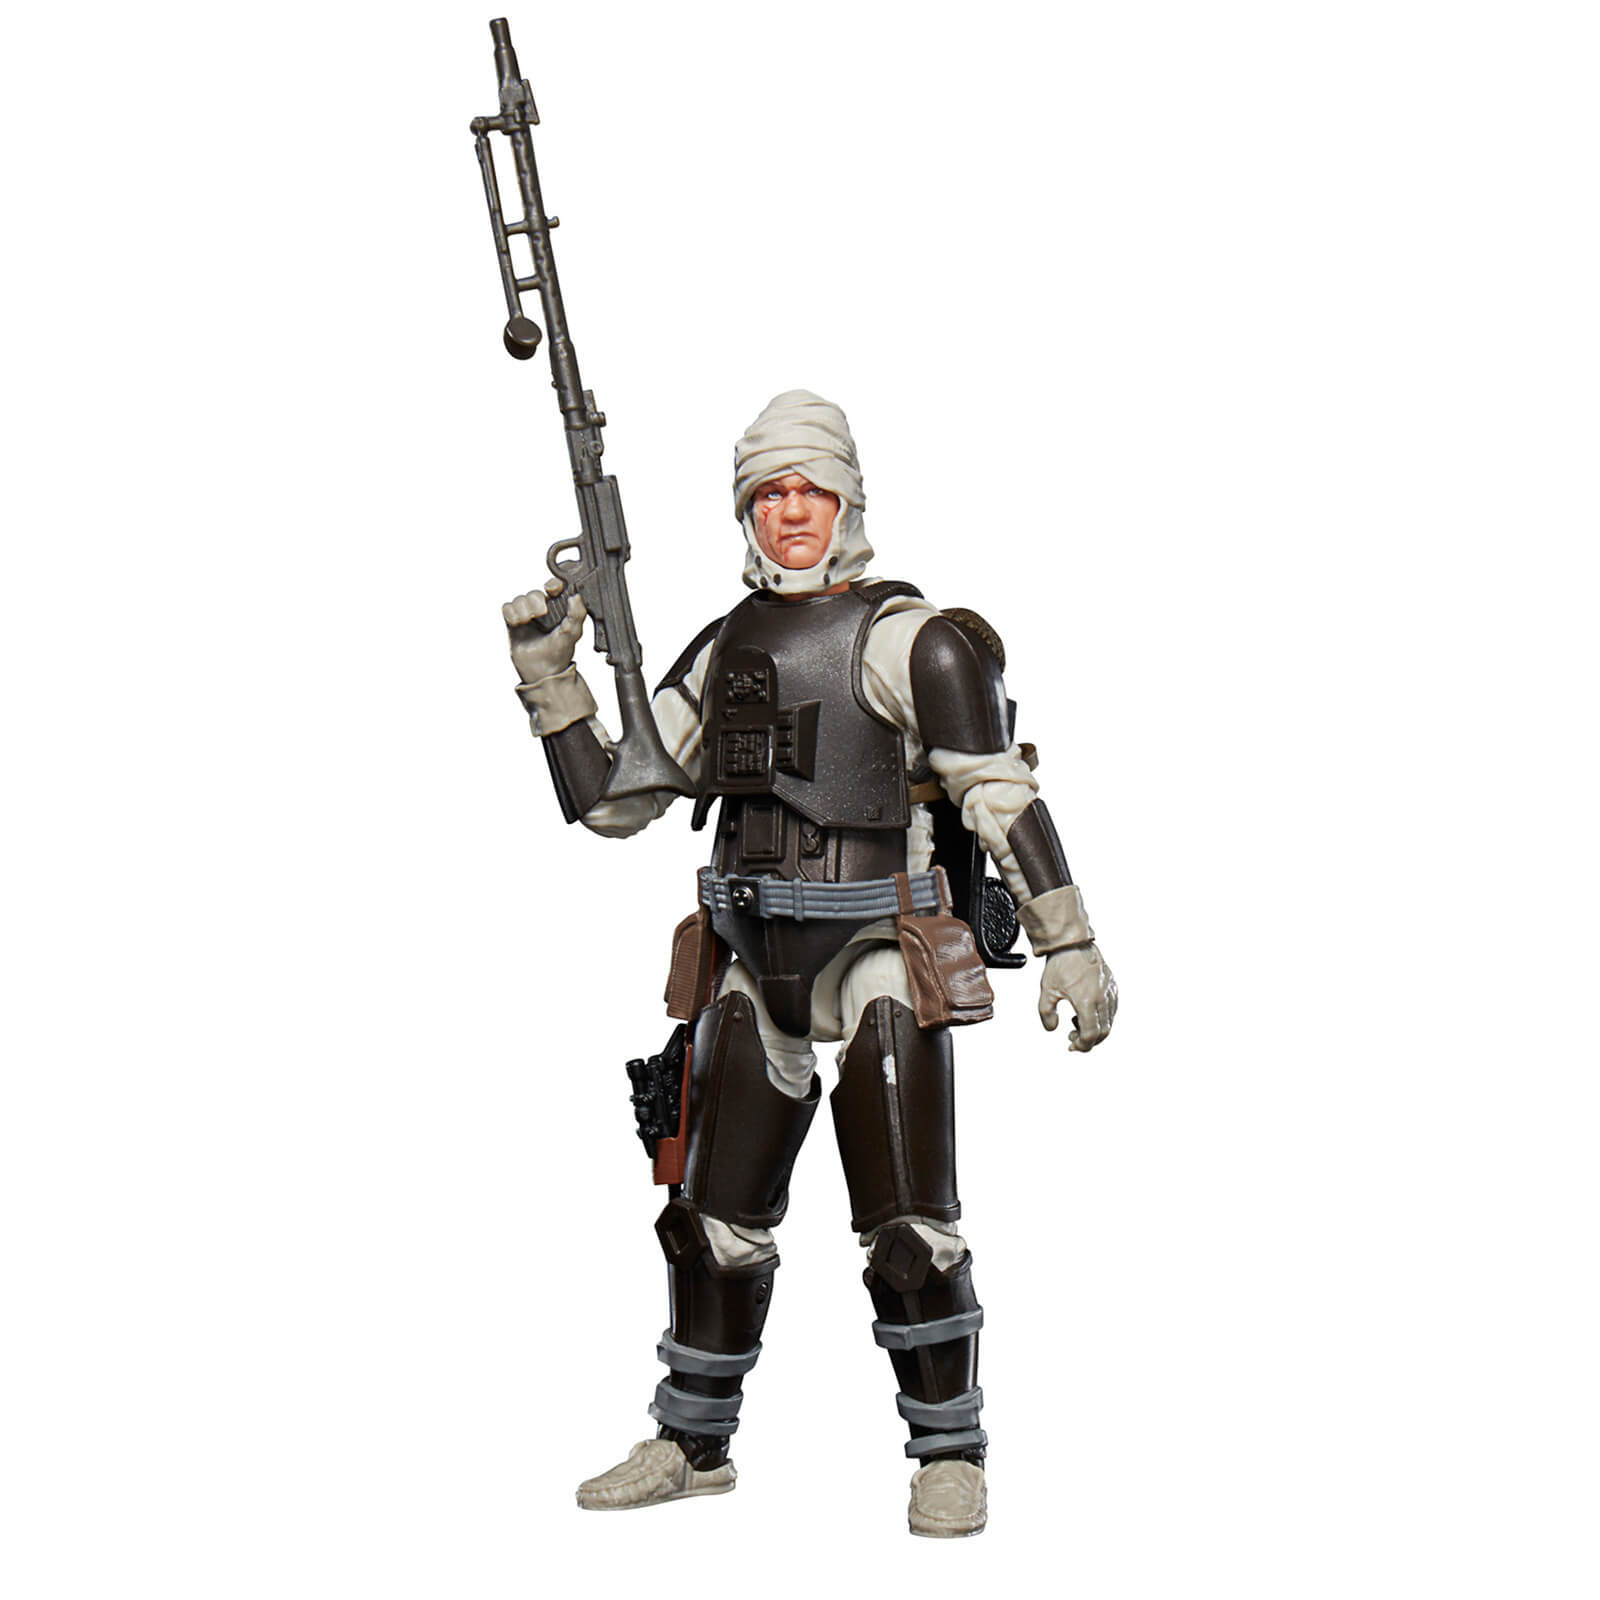 Image of Hasbro Star Wars The Black Series Archive Dengar 6 Inch Action Figure